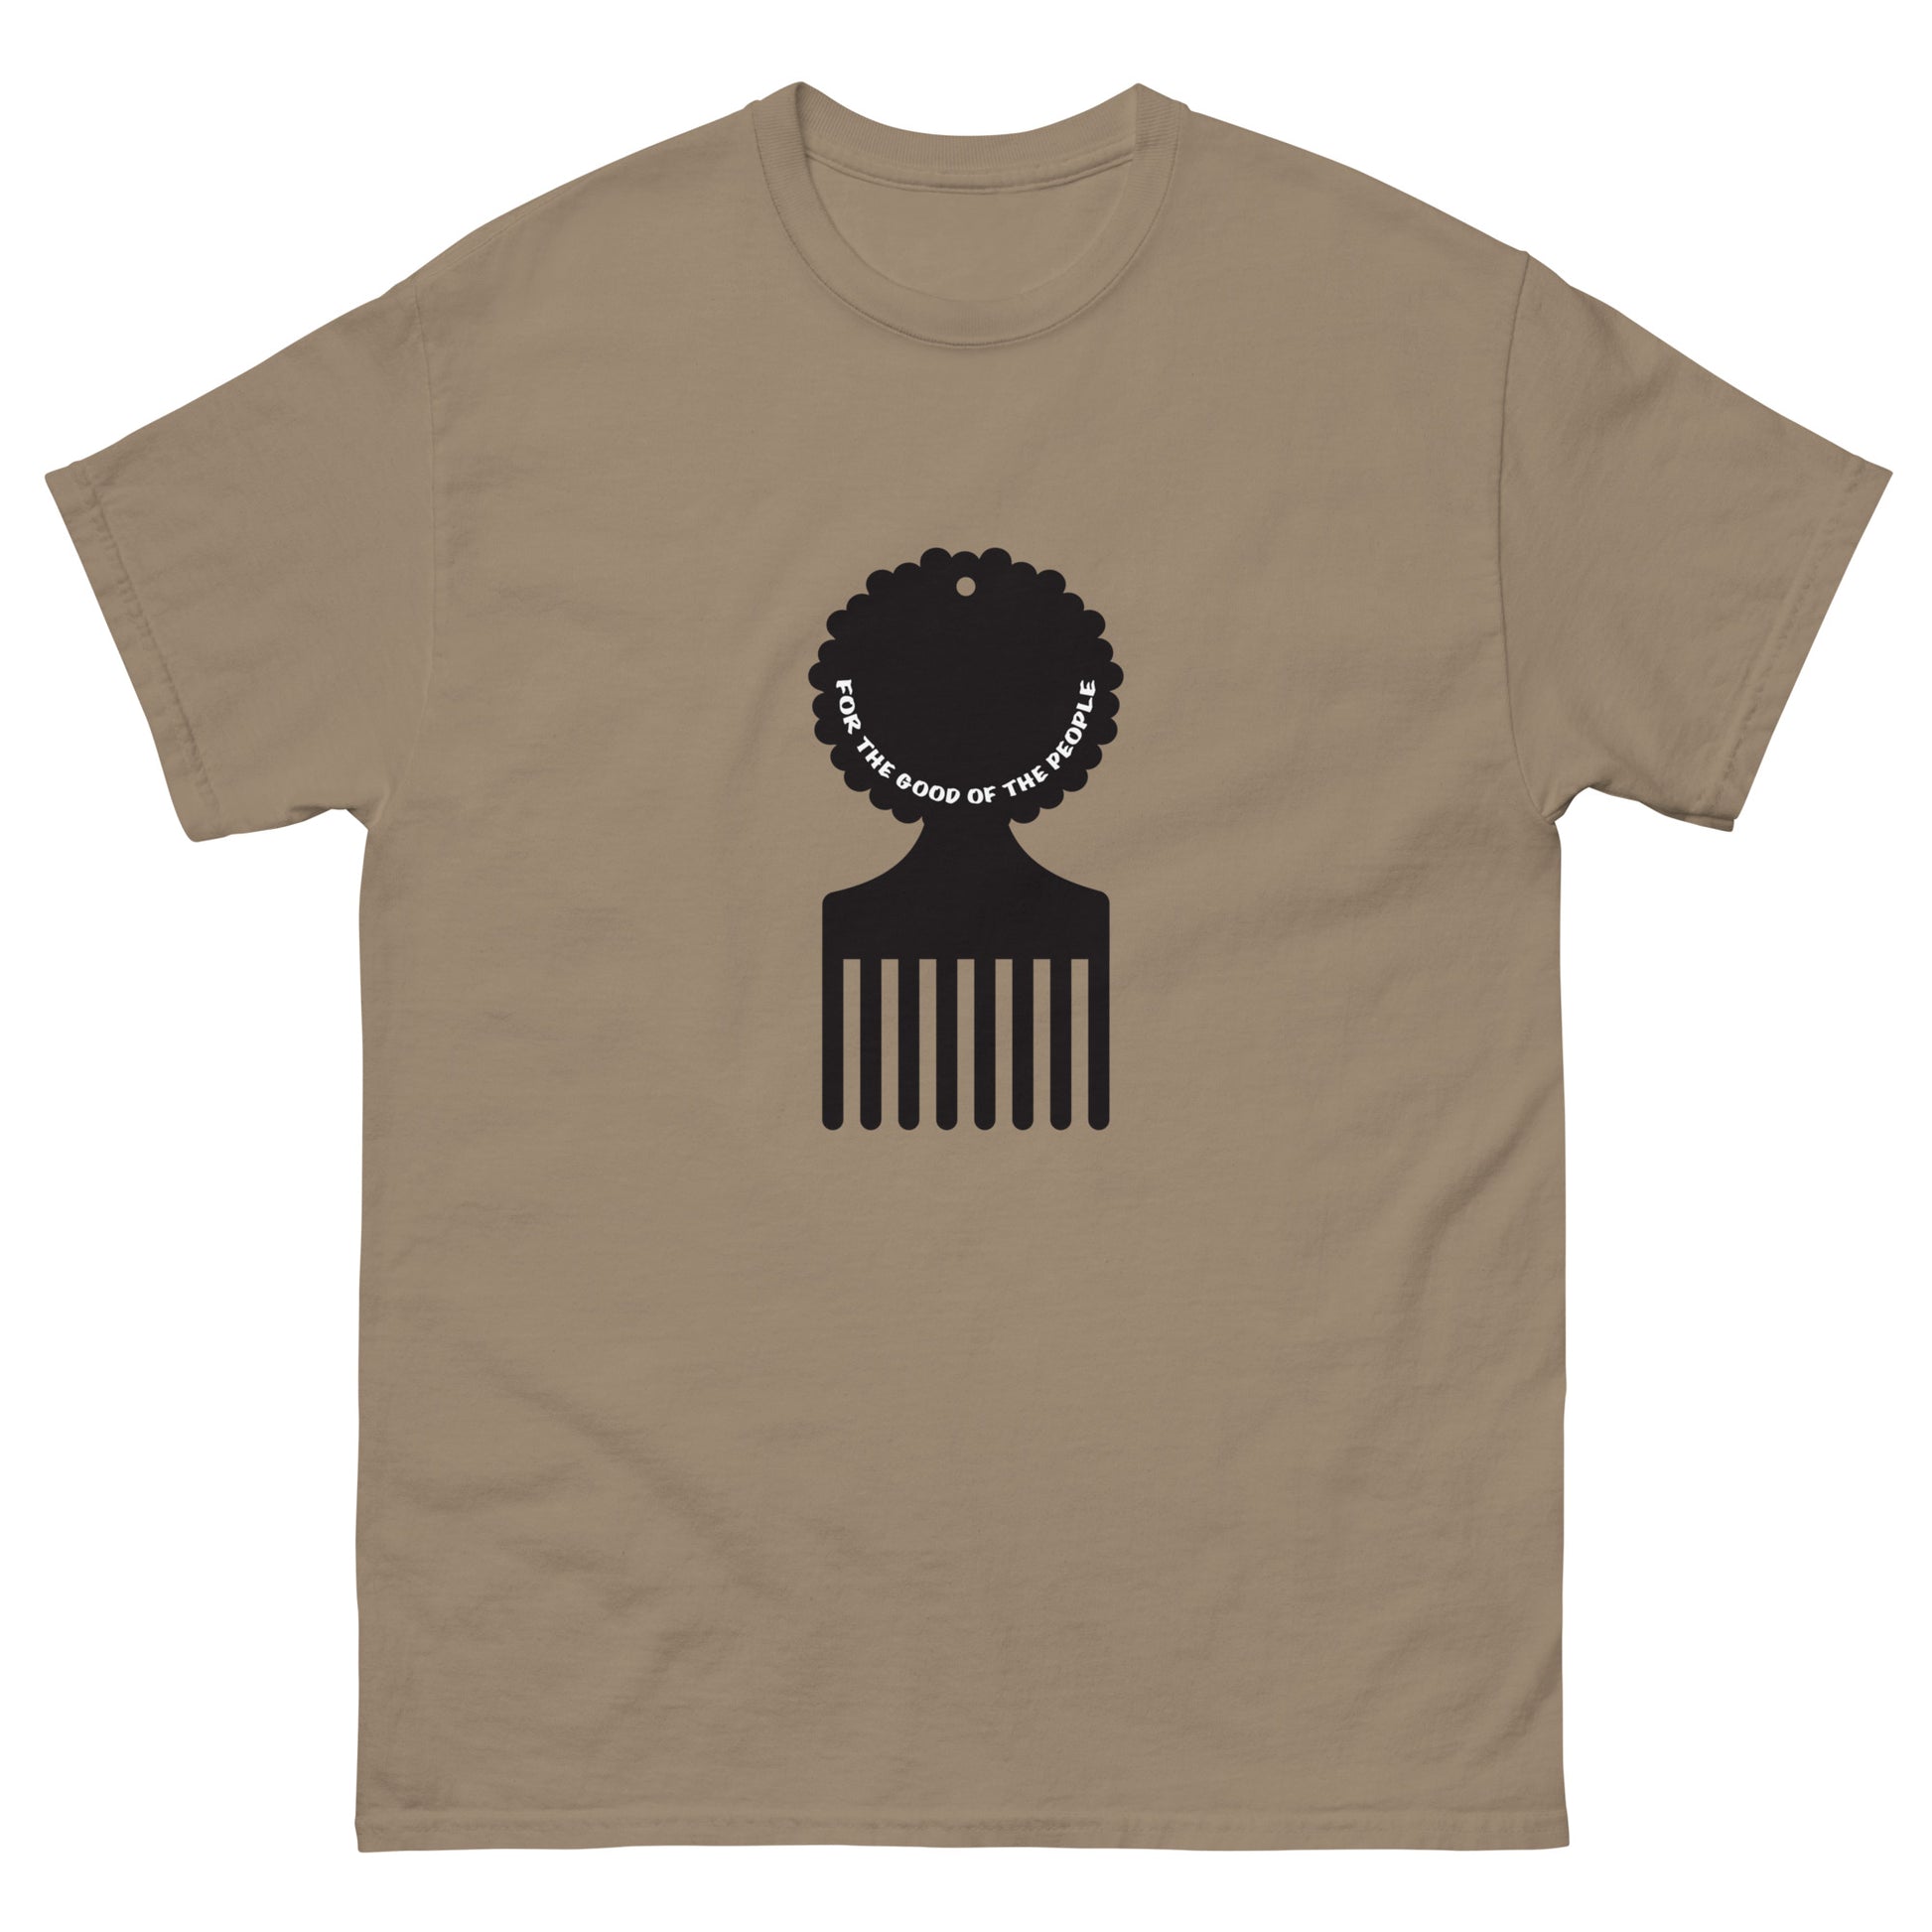 Men's brown savana tee with black afro pick in the center of shirt, with for the good of the people in white inside the afro pick's handle.